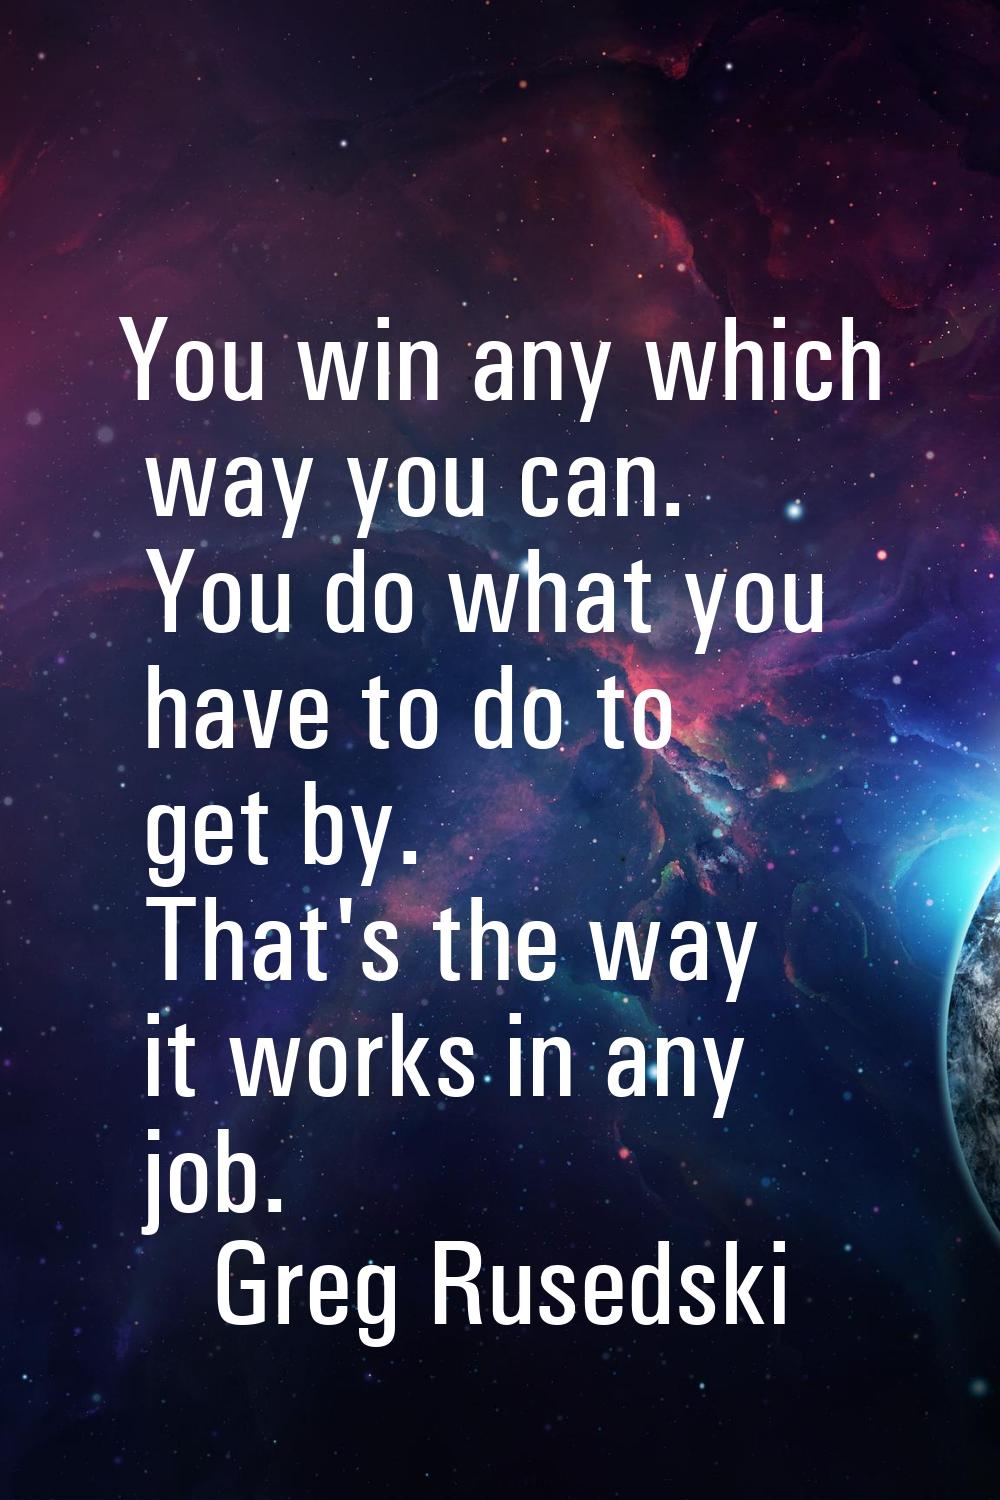 You win any which way you can. You do what you have to do to get by. That's the way it works in any